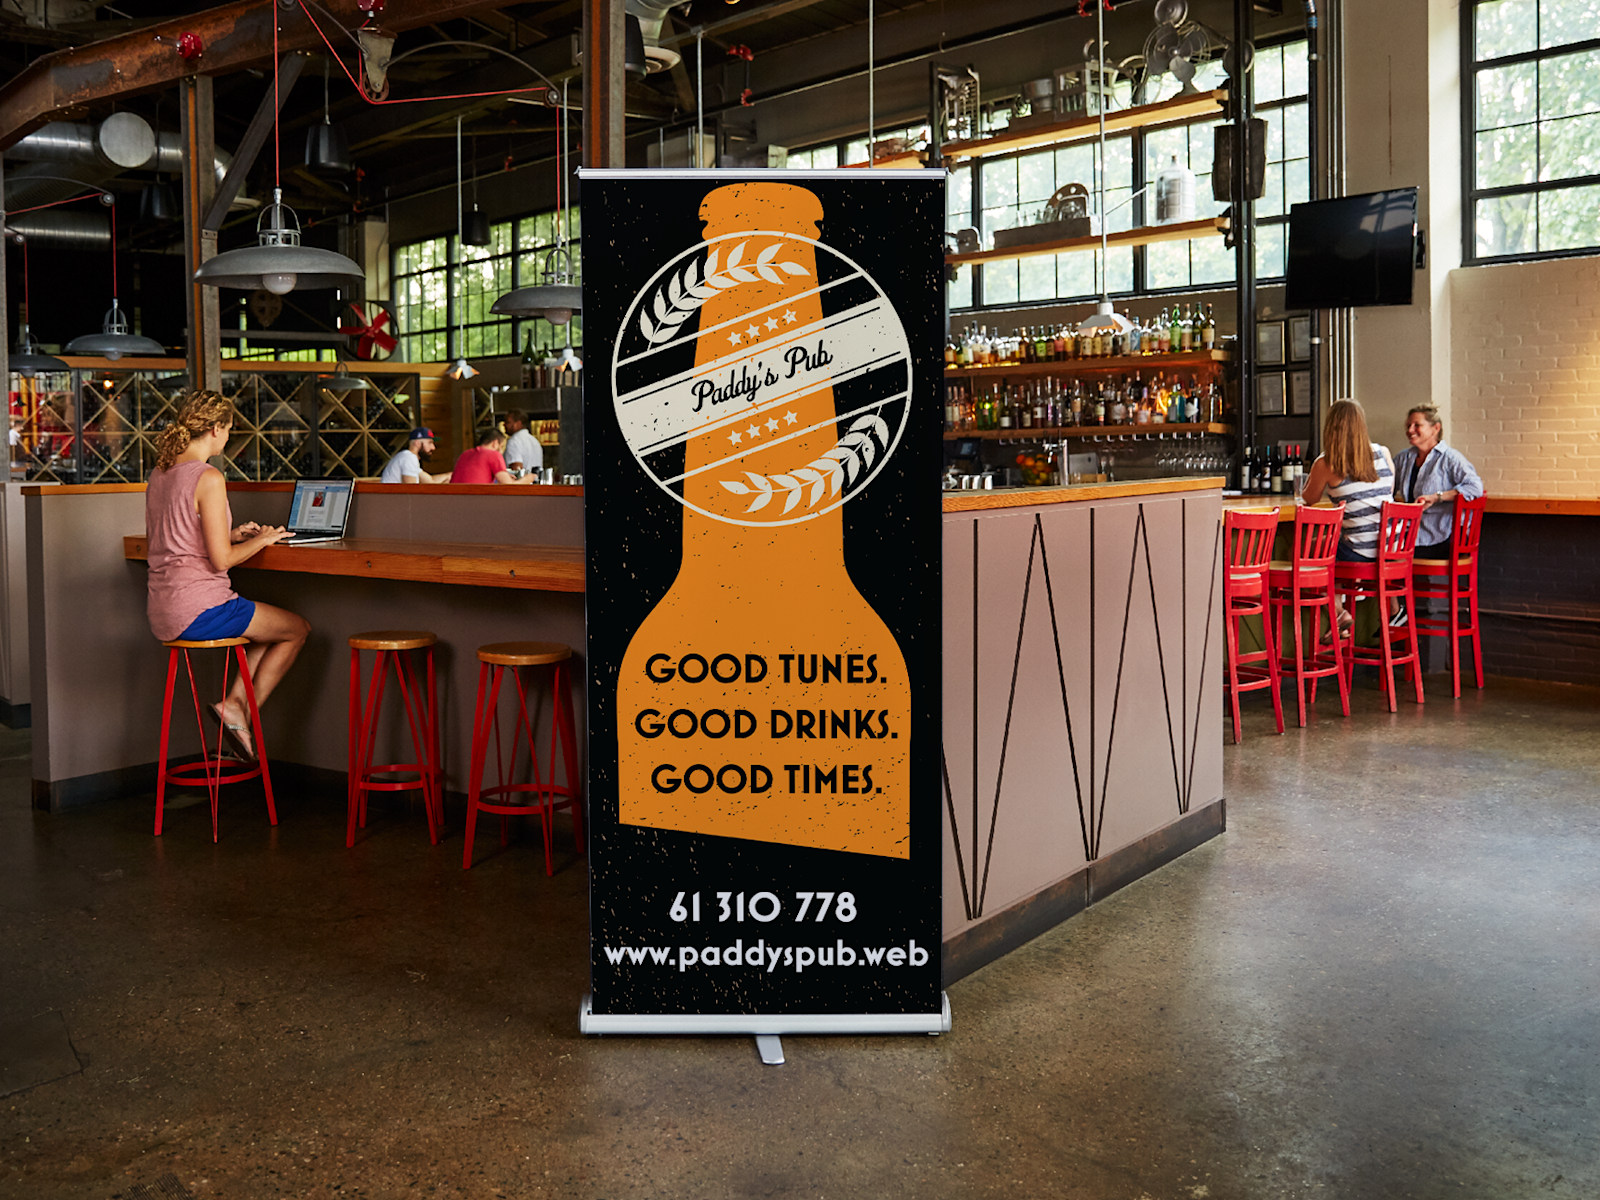 Roll-up banner advertising a pub, placed right in front of the bar.